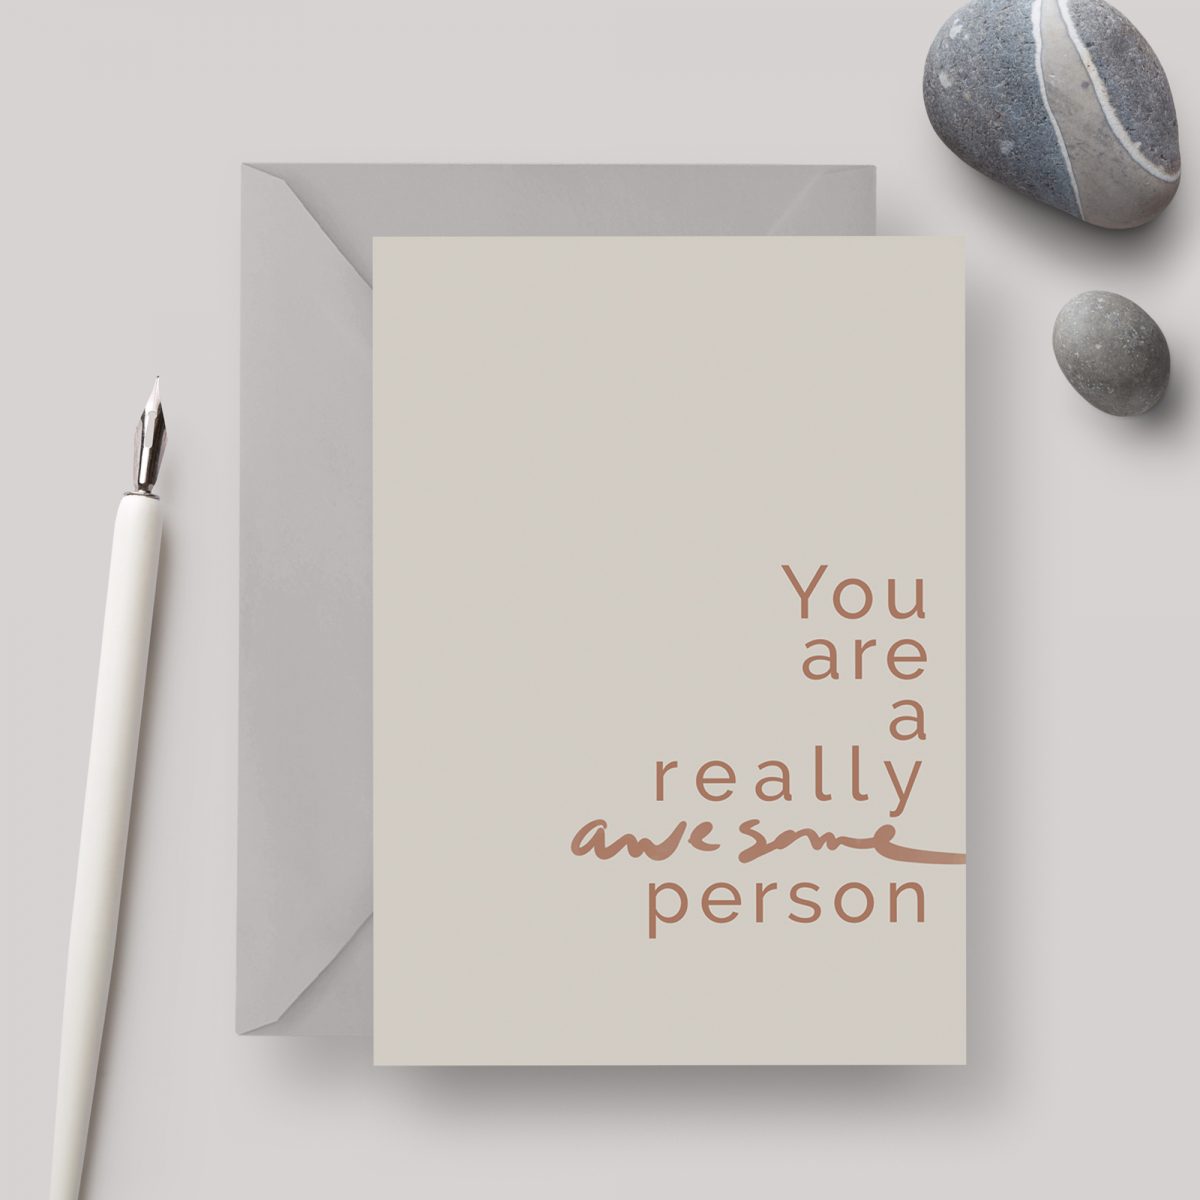 Awesome Person A6 greeting card with grey envelope